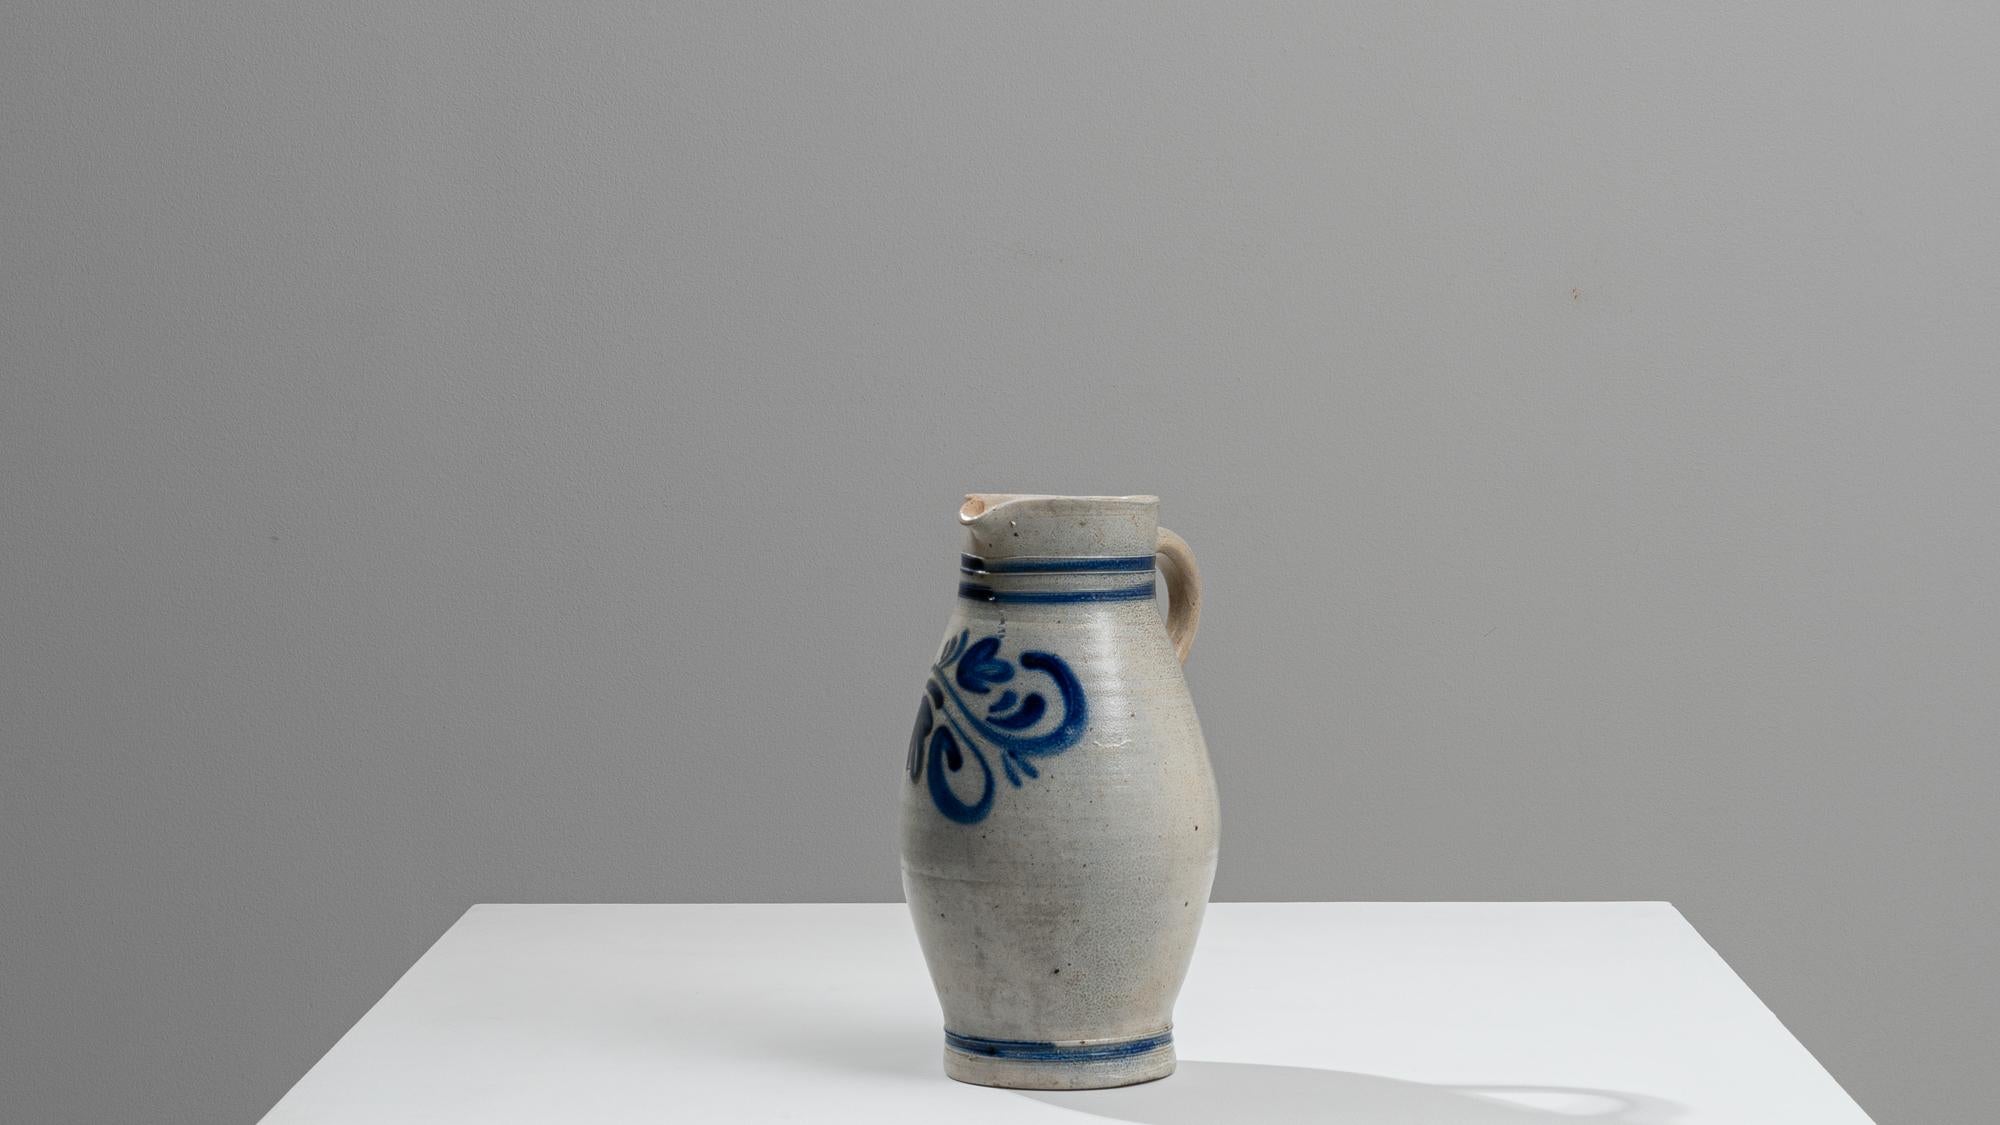 This 1900s Belgian ceramic jug showcases the understated beauty and elegance of early 20th-century European pottery. The jug's sturdy form is beautifully crafted from a speckled grey ceramic, enhanced with bold blue stripes and a simplistic eye